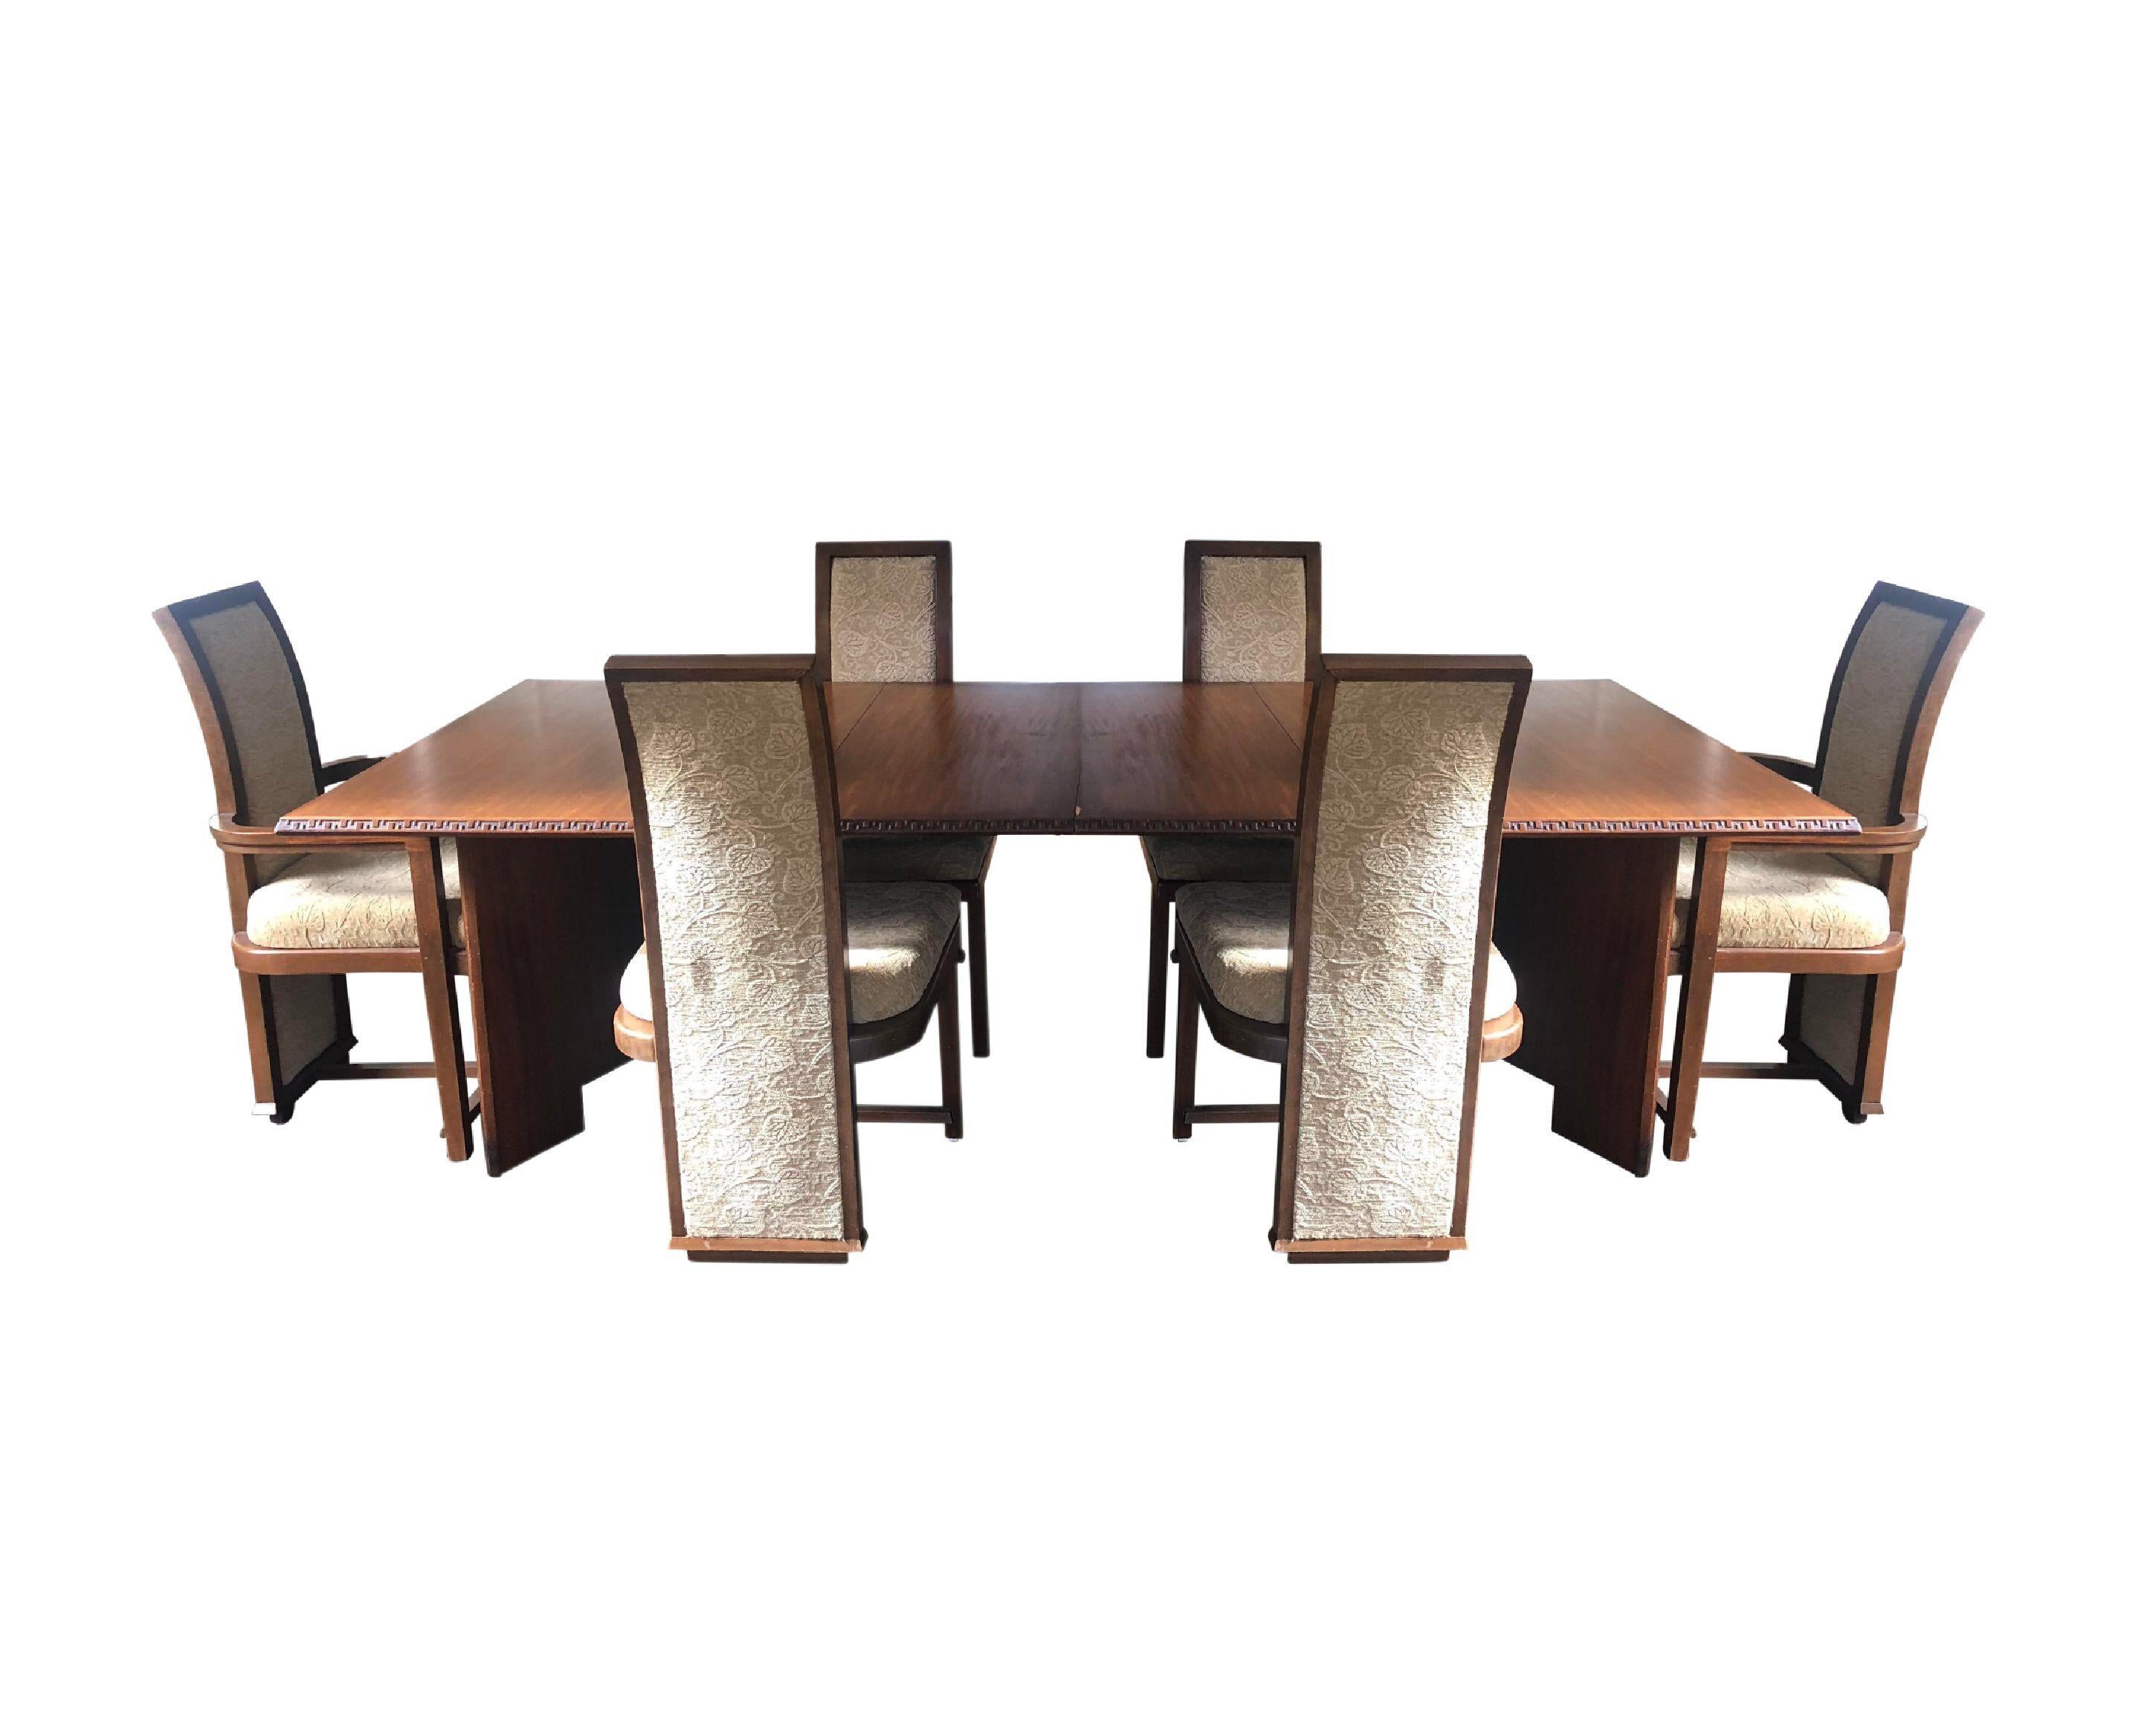 Rare complete original condition Frank Lloyd Wright Taliesen dining table and chair set (for 6), mahogany, 1955, Signed. Manufactured by Heritage Henredon. This set has been together since 1955 and I'd prefer for it to remain as such moving